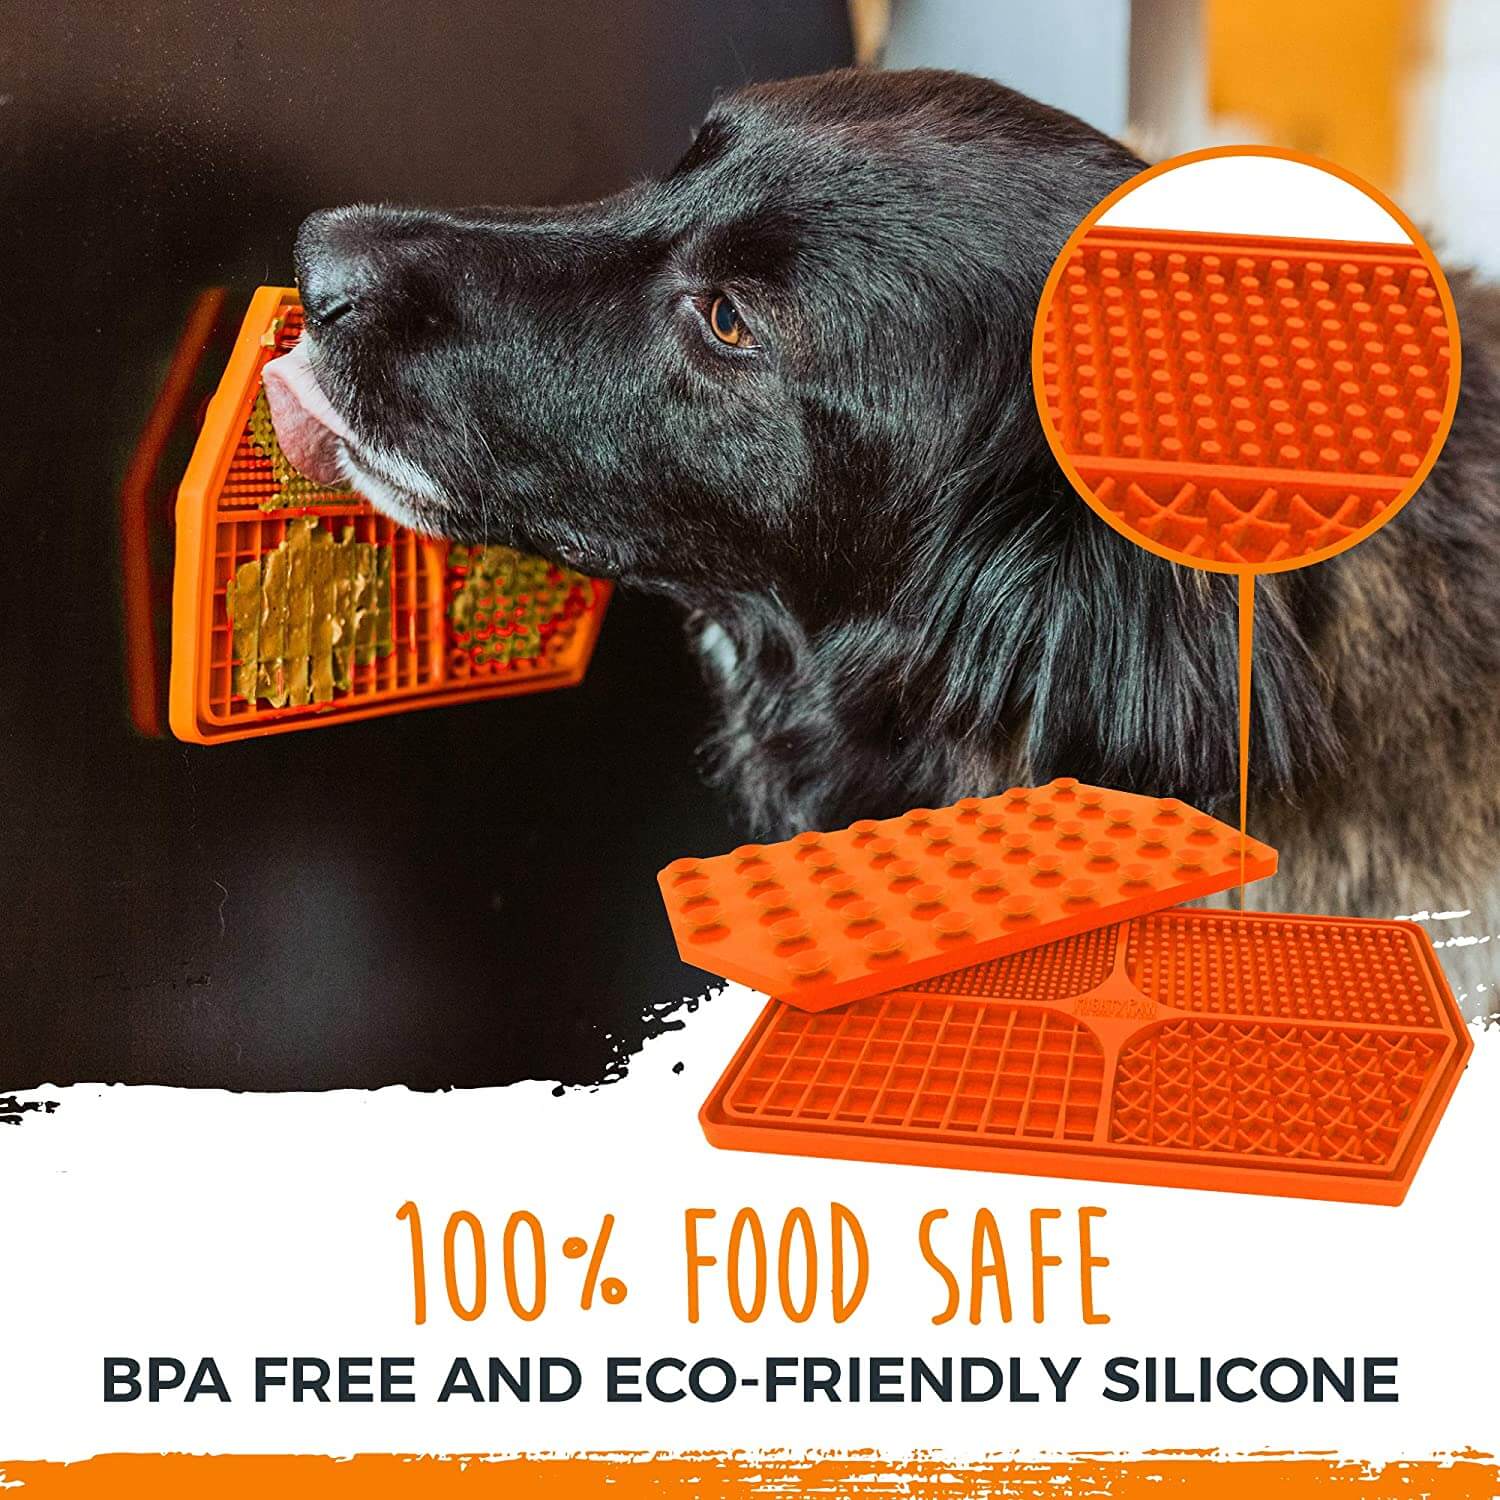 Check Our Lick Mat to Calm Your Dog's Anxiety | Dog for Dog Orange